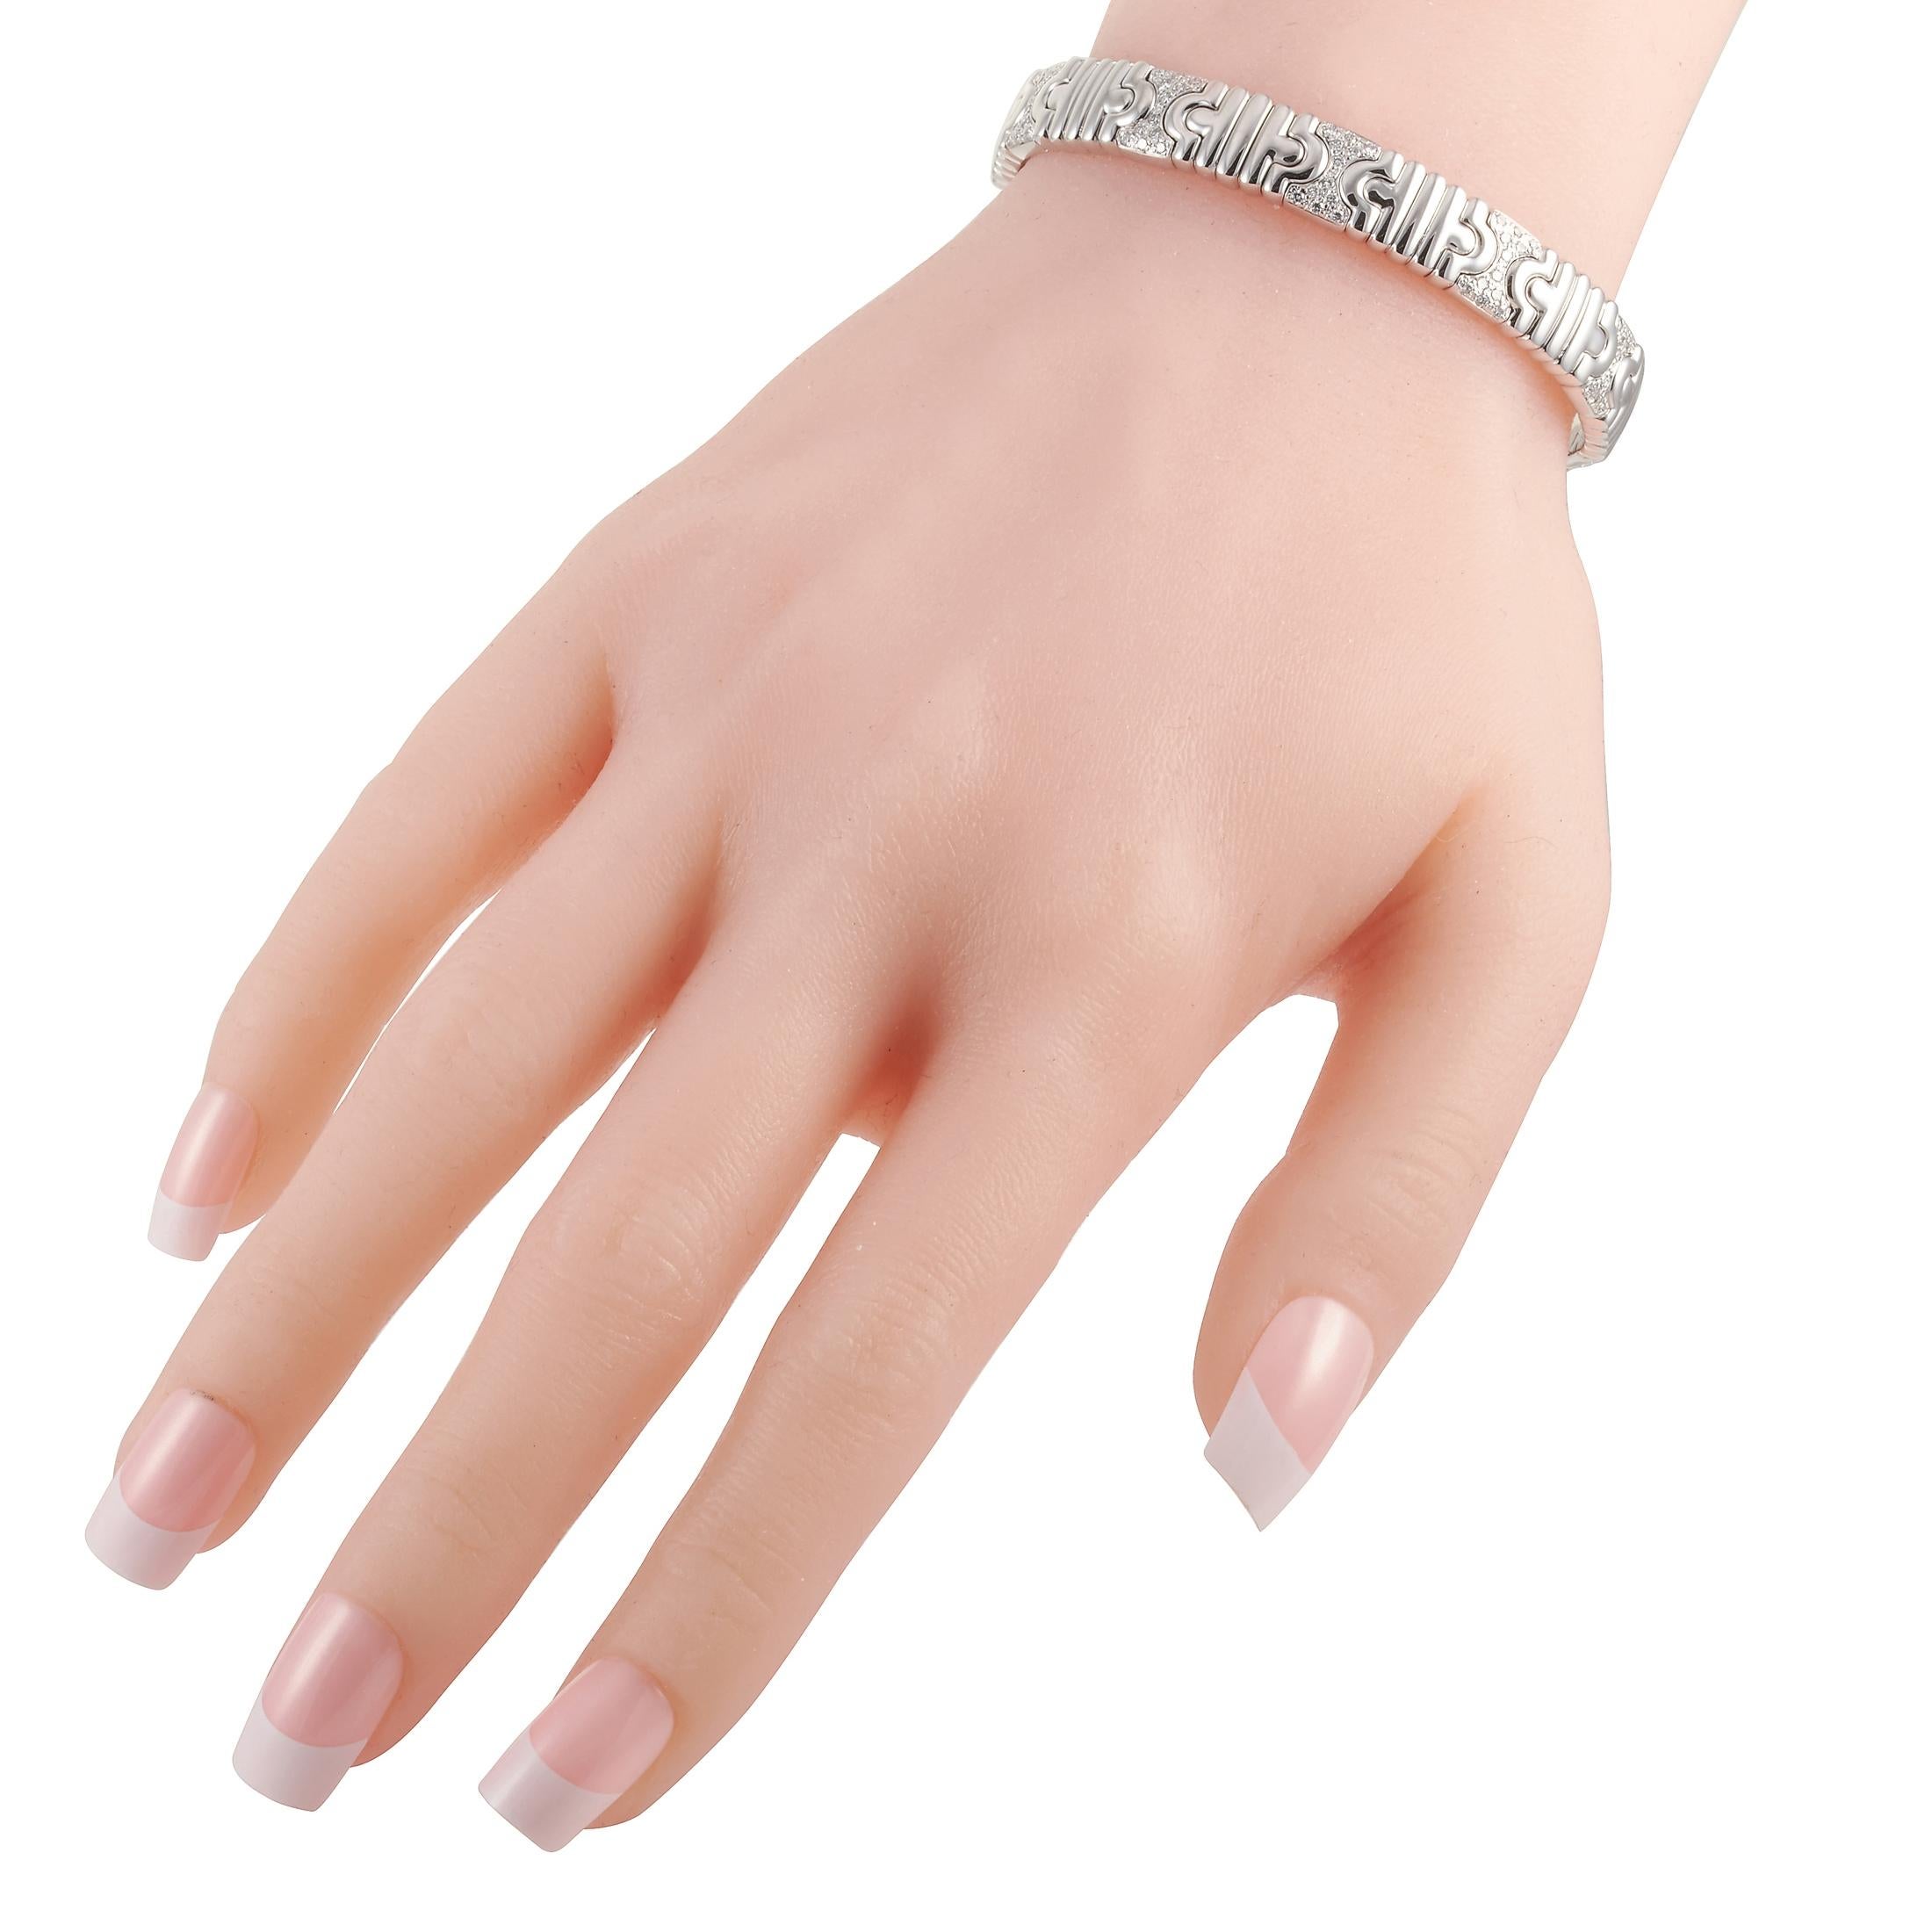 The Bvlgari “Parentesi” bracelet is made of 18K white gold and embellished with diamonds that boast E color and VVS clarity and amount to 1.00 carat. The bracelet weighs 42.7 grams and measures 7.065” in length.
 
 This jewelry piece is offered in